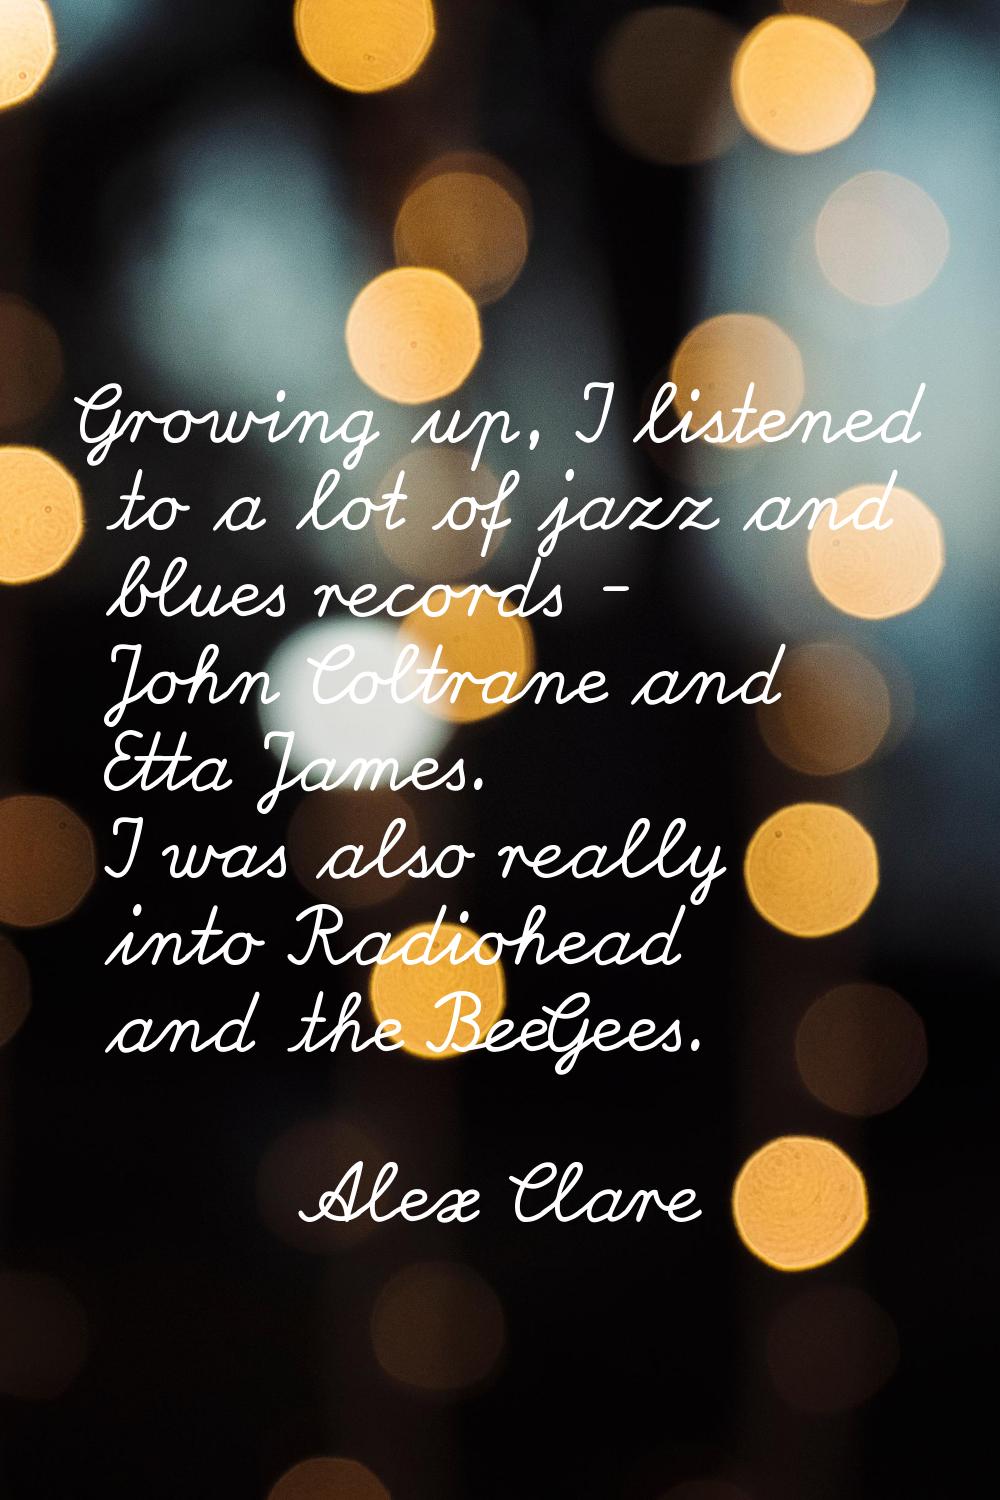 Growing up, I listened to a lot of jazz and blues records - John Coltrane and Etta James. I was als